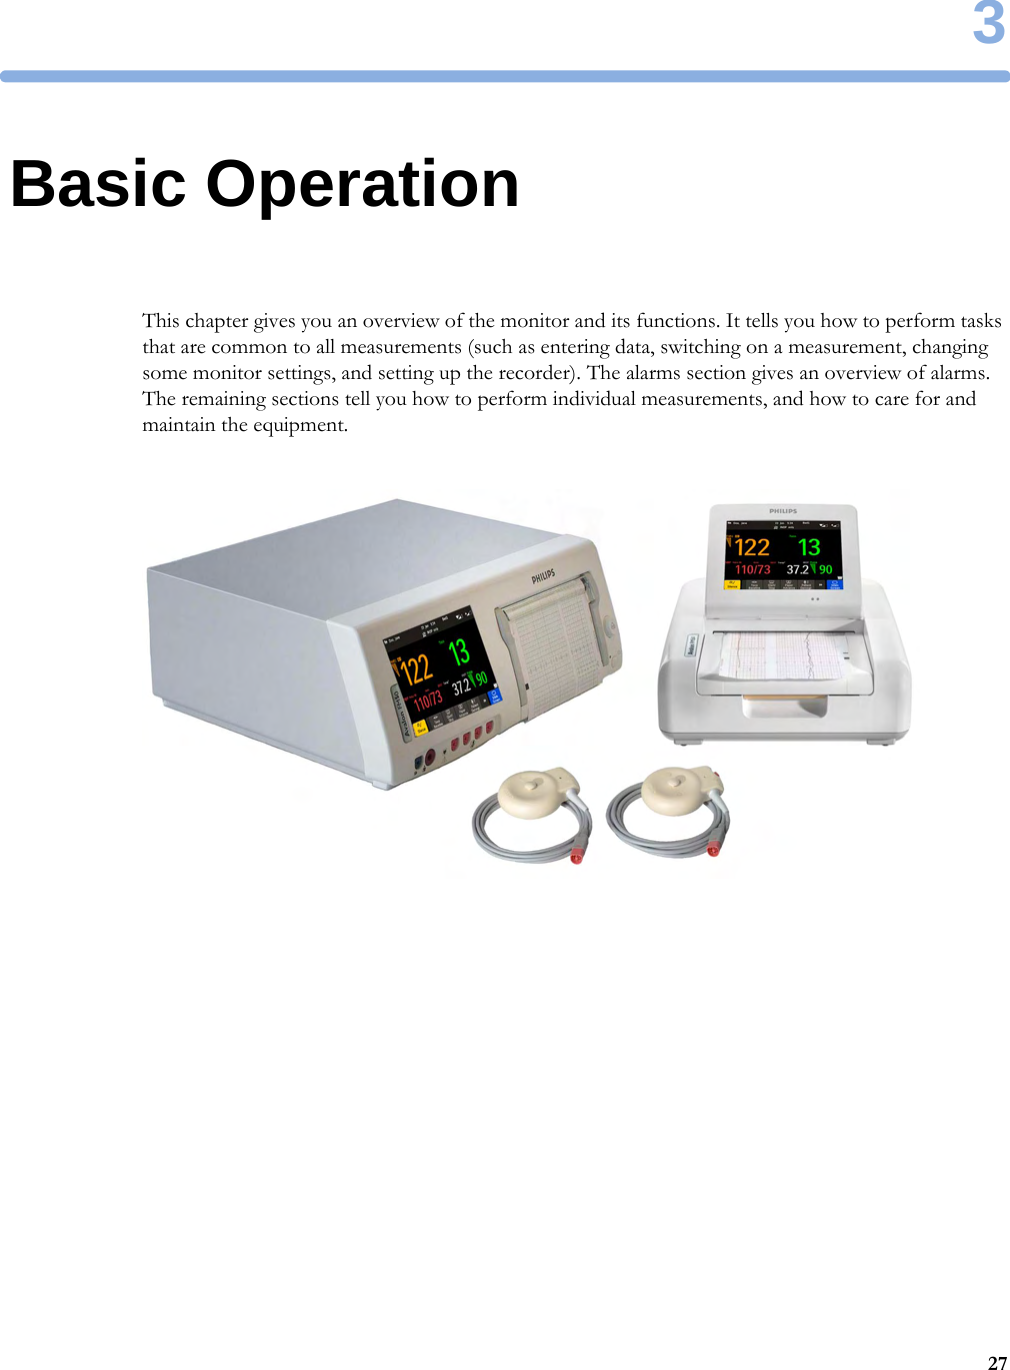 3273Basic OperationThis chapter gives you an overview of the monitor and its functions. It tells you how to perform tasks that are common to all measurements (such as entering data, switching on a measurement, changing some monitor settings, and setting up the recorder). The alarms section gives an overview of alarms. The remaining sections tell you how to perform individual measurements, and how to care for and maintain the equipment.